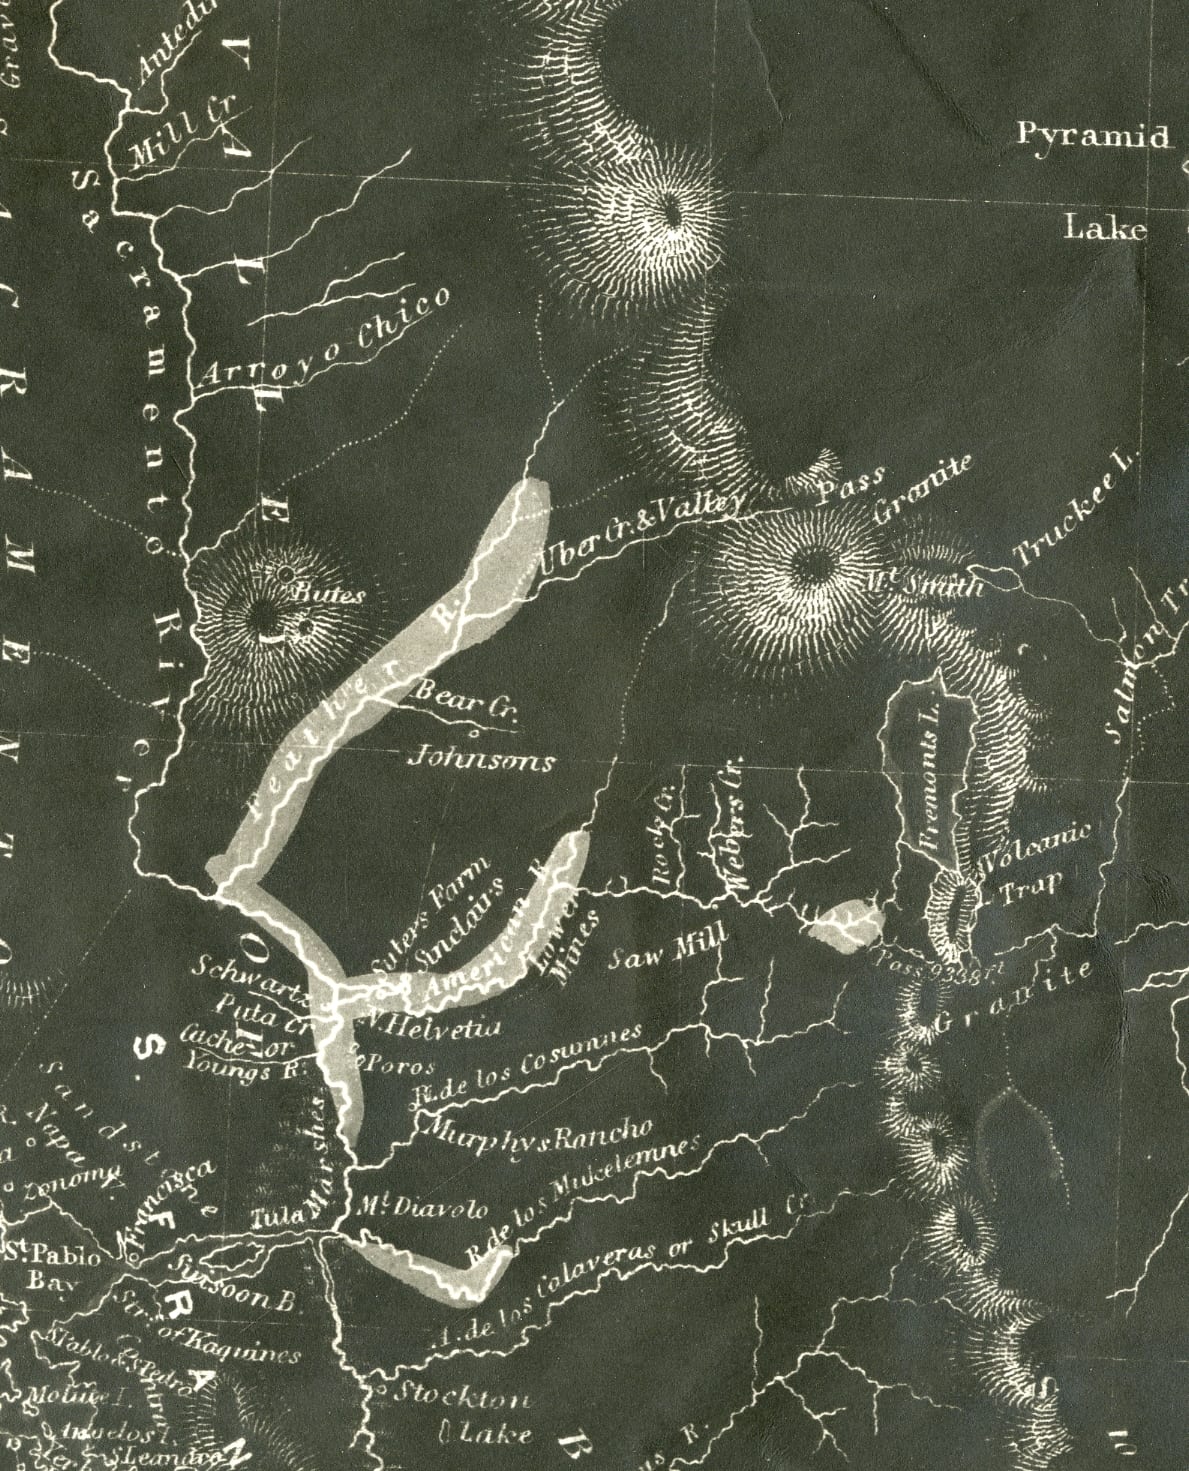 1849 Map of the Gold Regions of California showing "Fremonts L." [Fremont's Lake]